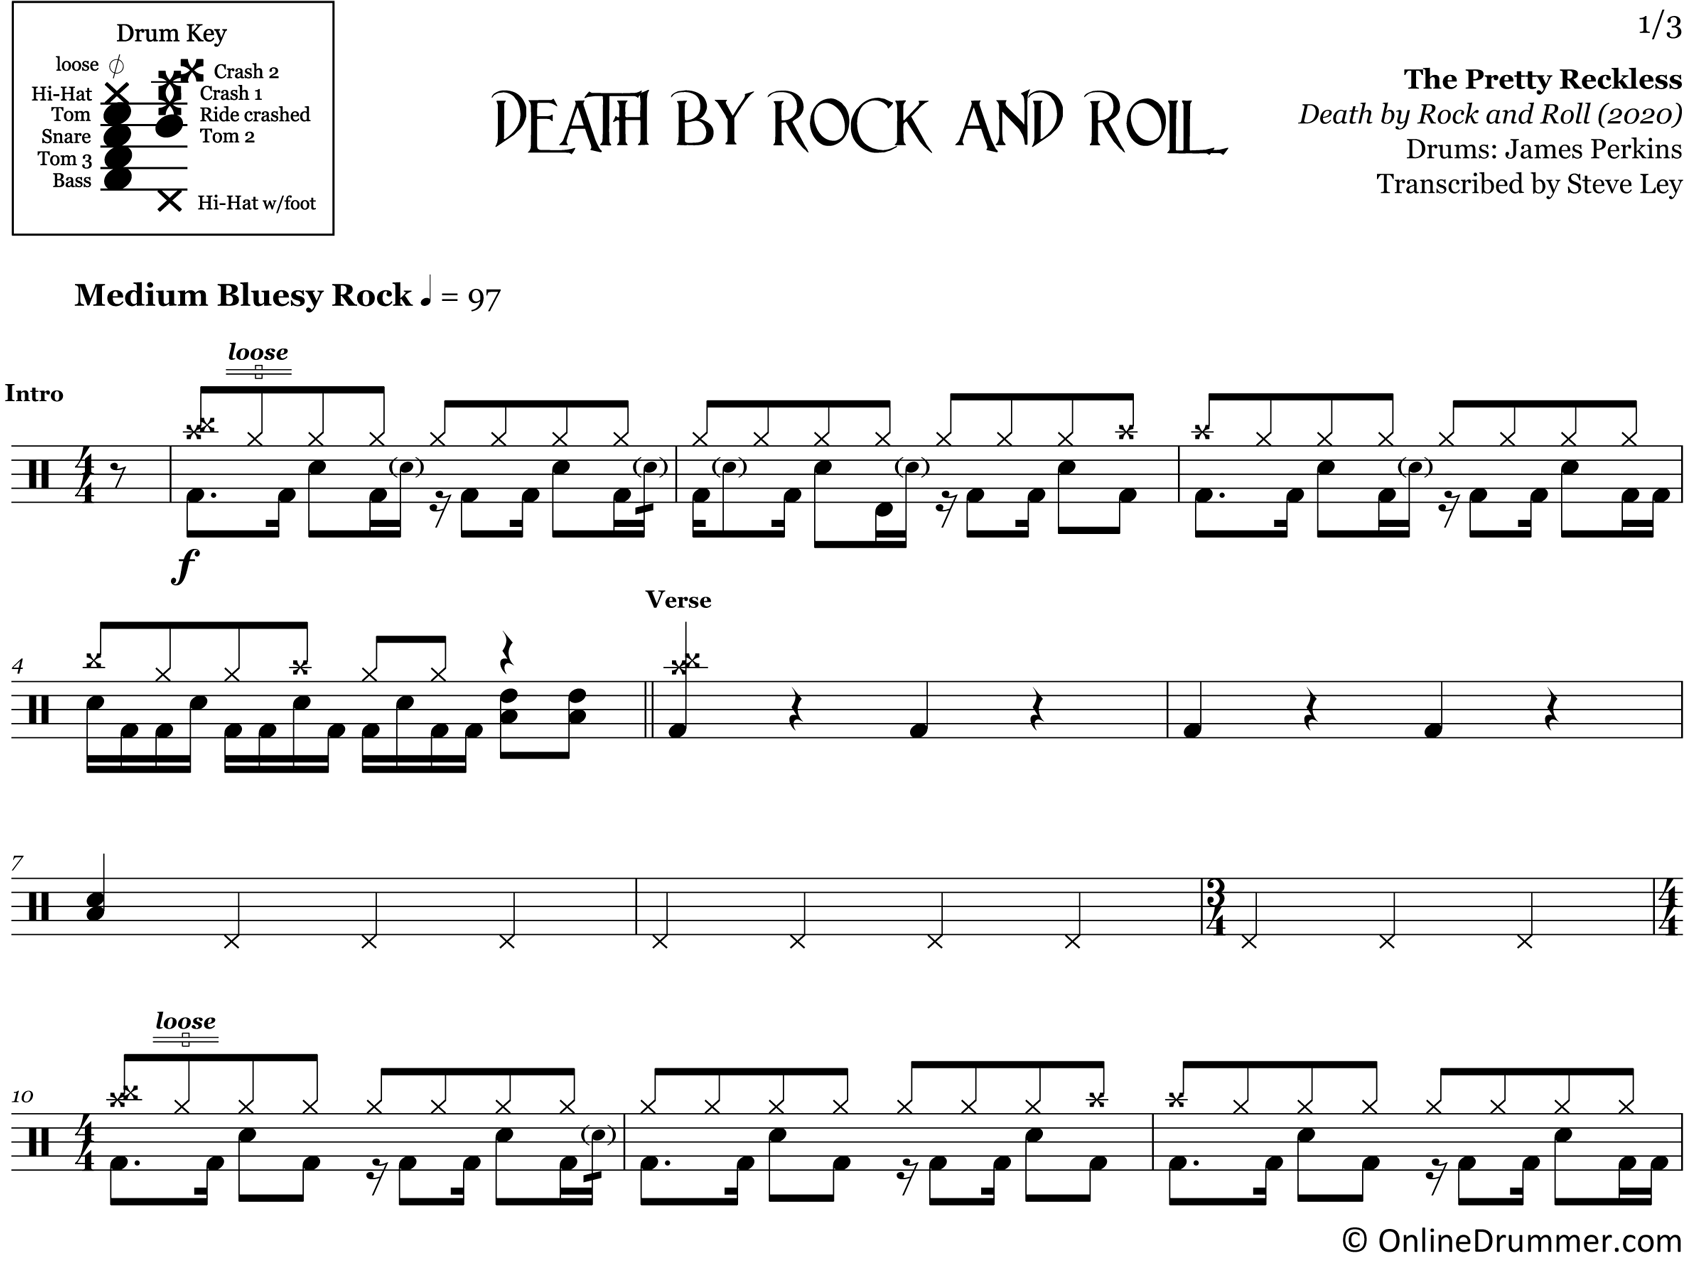 Death by Rock and Roll - The Pretty Reckless - Drum Sheet Music